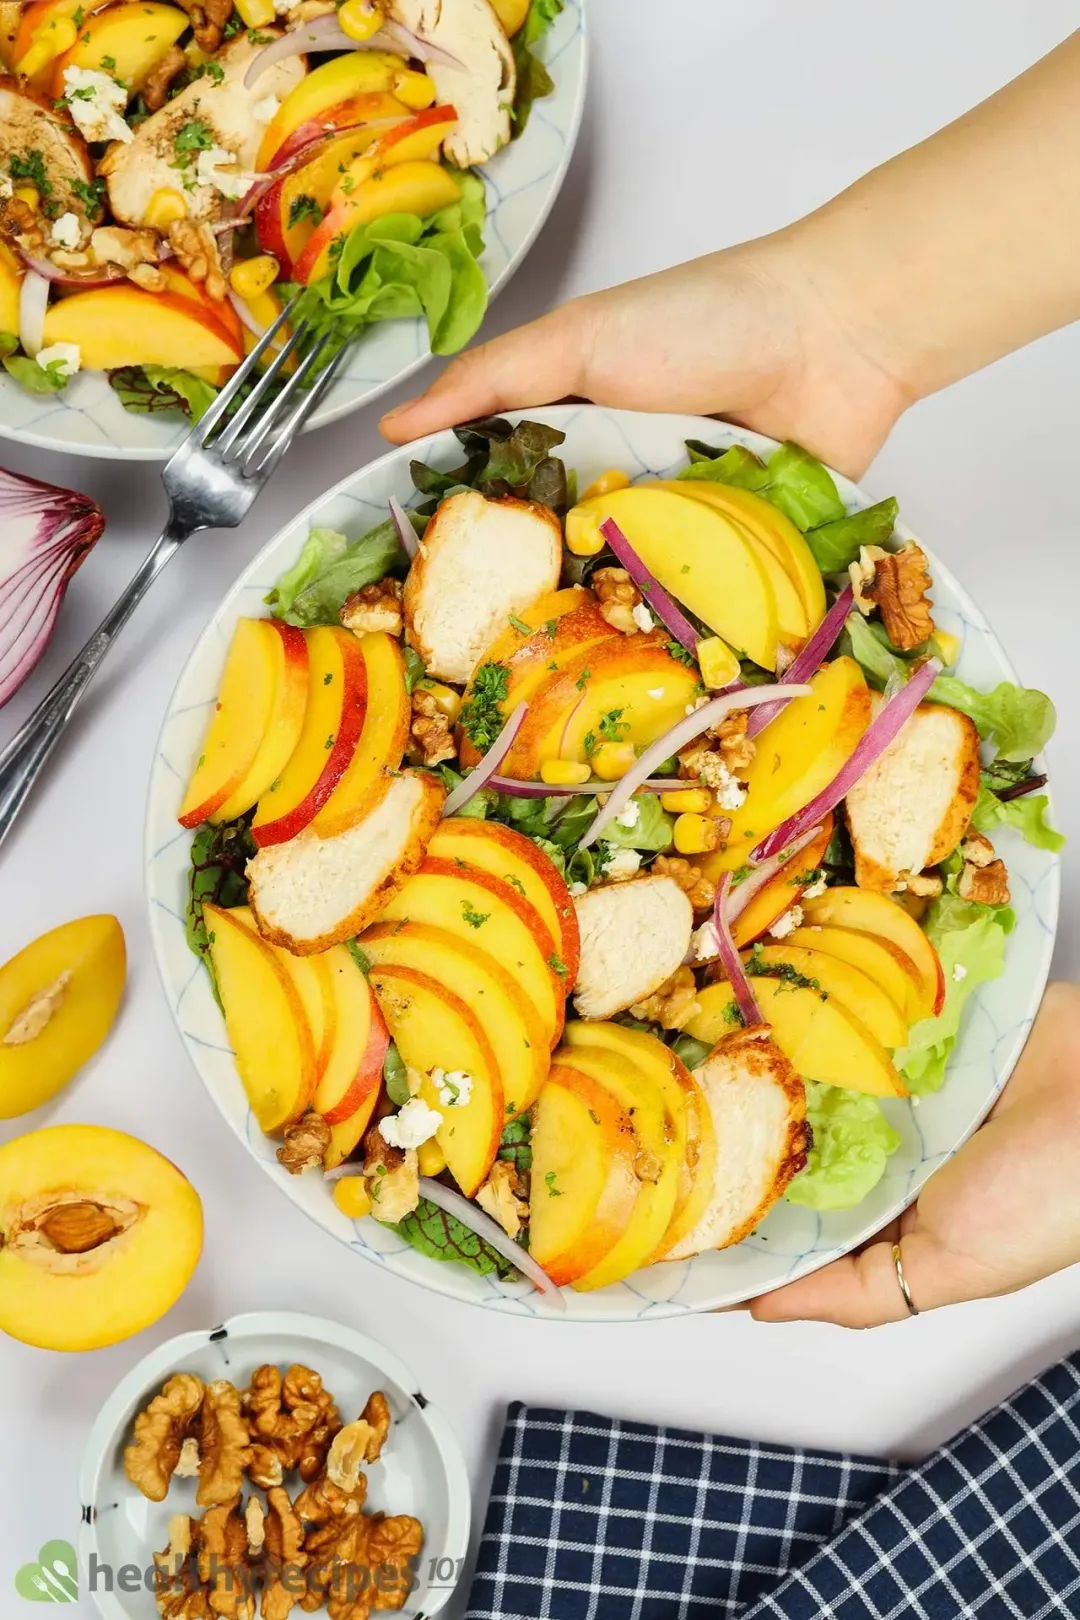 How to Store Leftovers Peach Salad